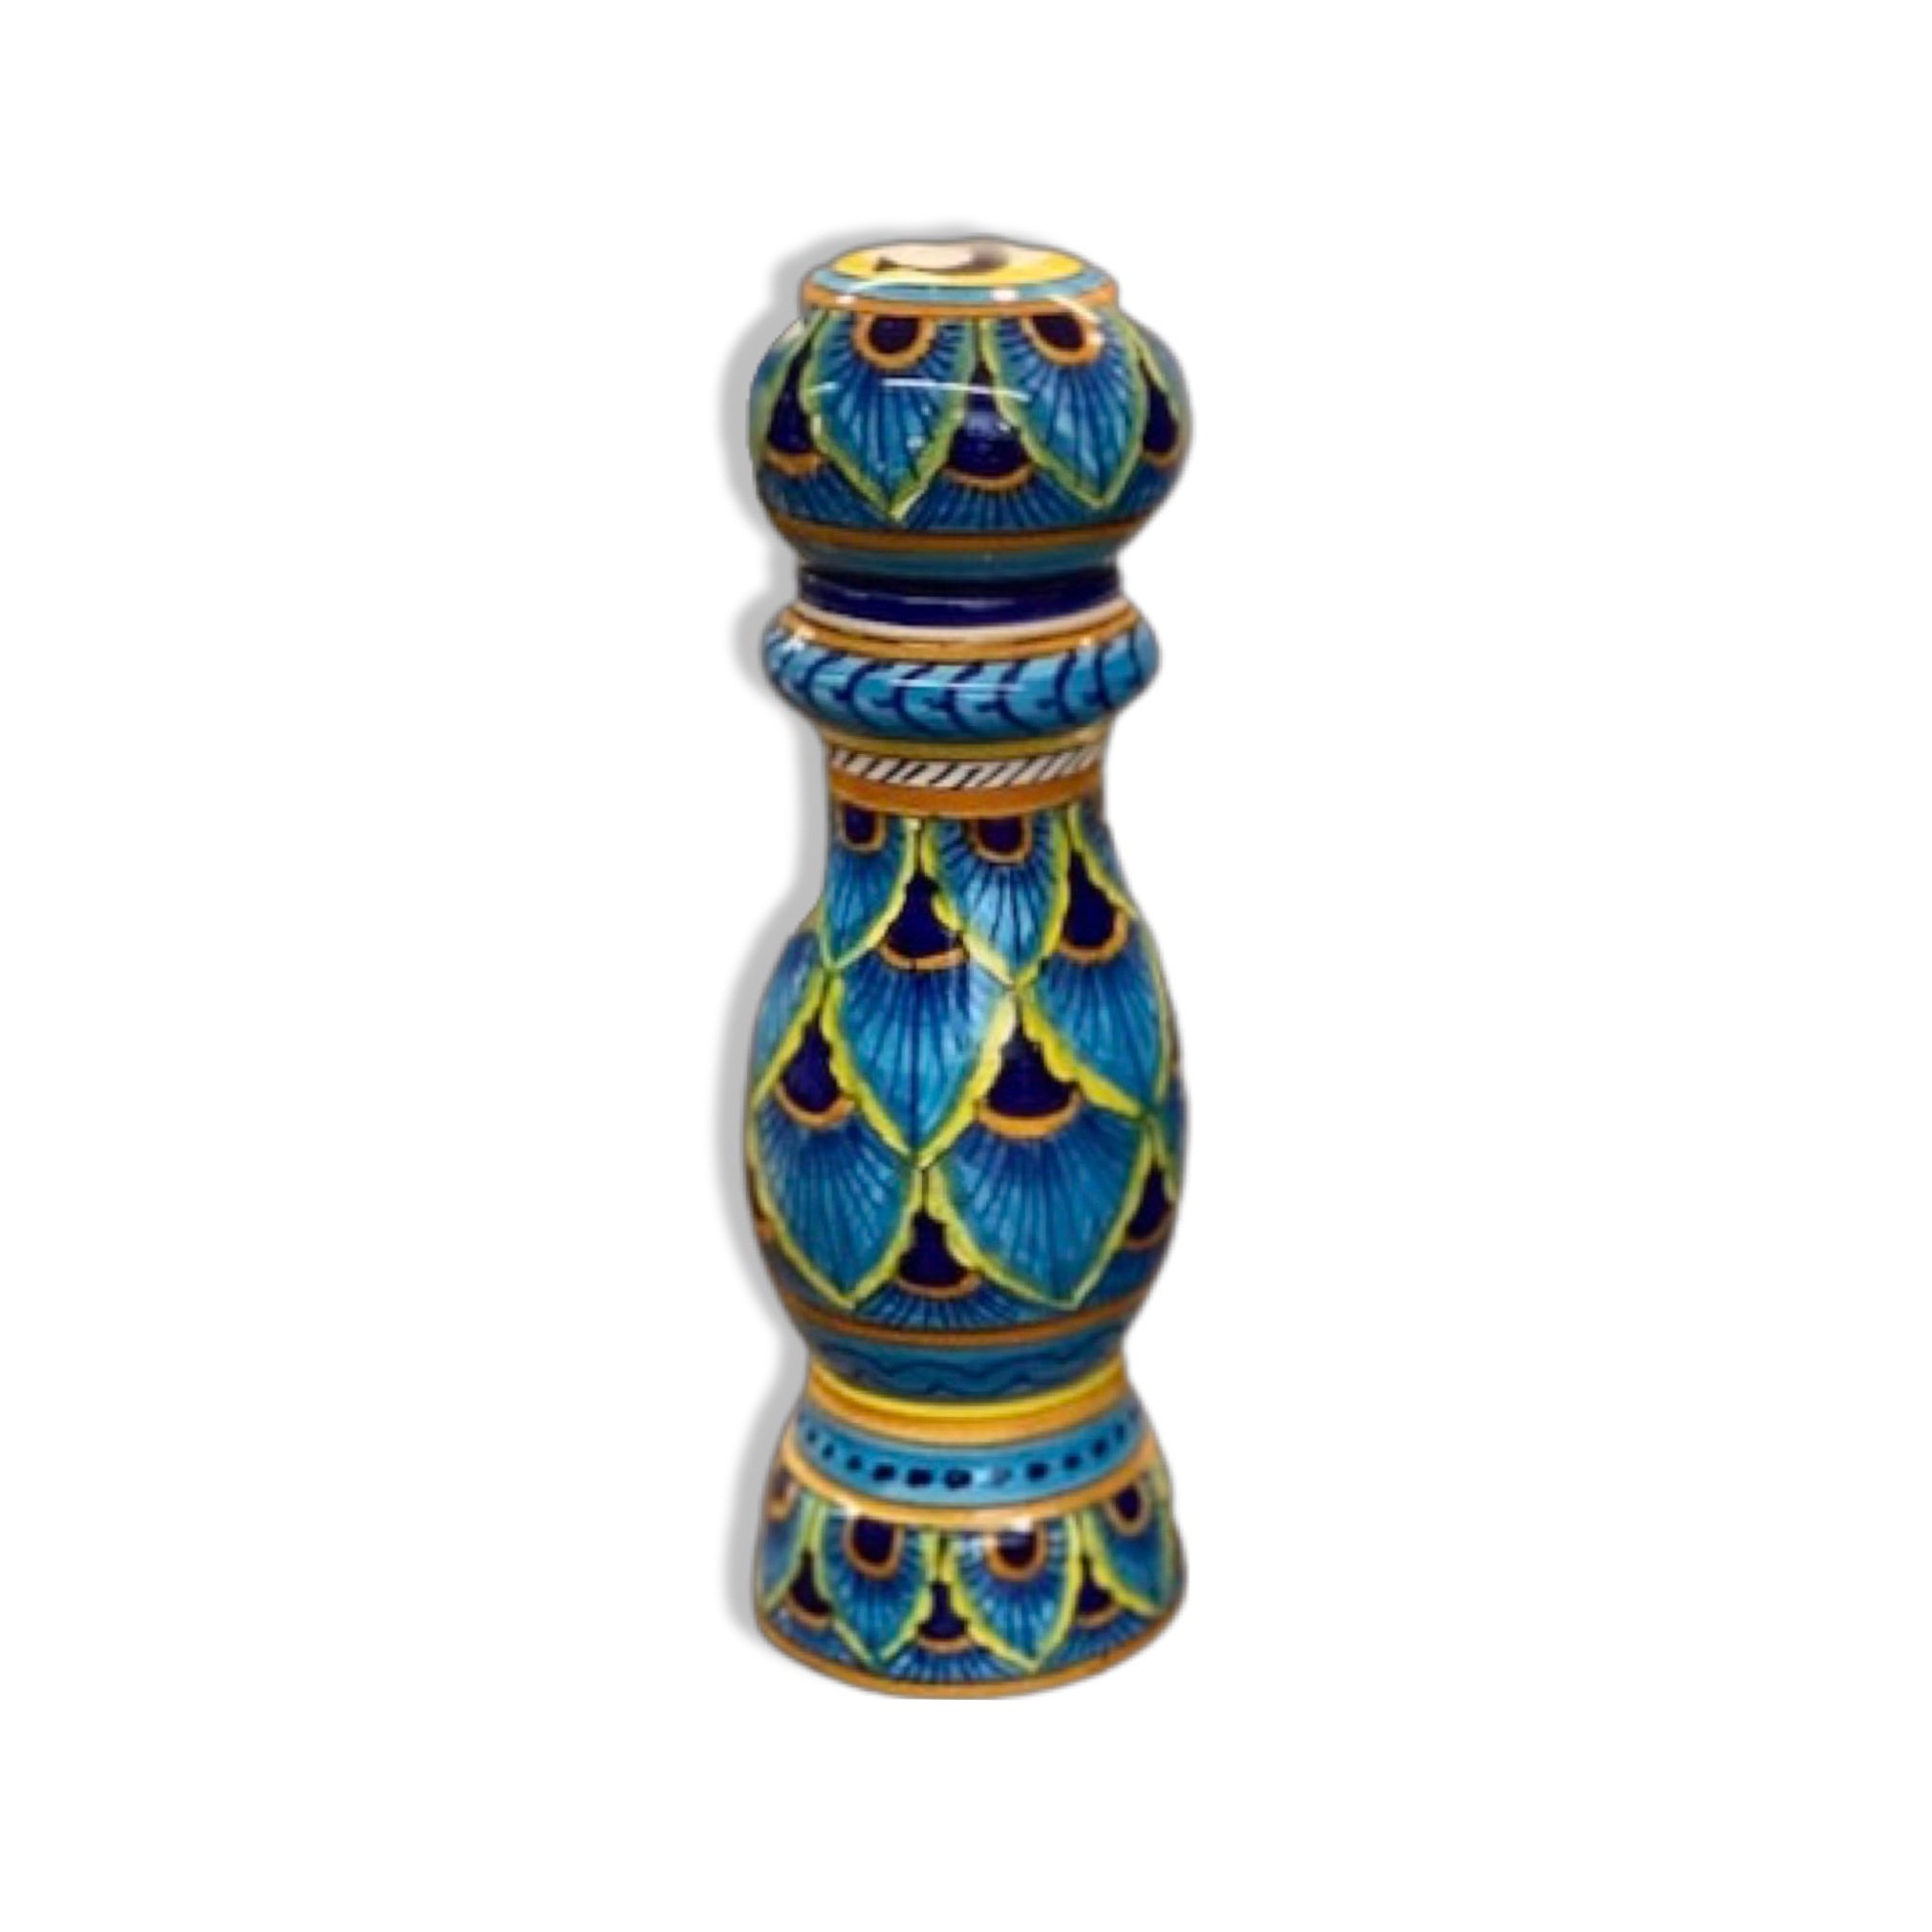 Eugenio - Peacock Salt Grinder, ceramics, pottery, italian design, majolica, handmade, handcrafted, handpainted, home decor, kitchen art, home goods, deruta, majolica, Artisan, treasures, traditional art, modern art, gift ideas, style, SF, shop small business, artists, shop online, landmark store, legacy, one of a kind, limited edition, gift guide, gift shop, retail shop, decorations, shopping, italy, home staging, home decorating, home interiors